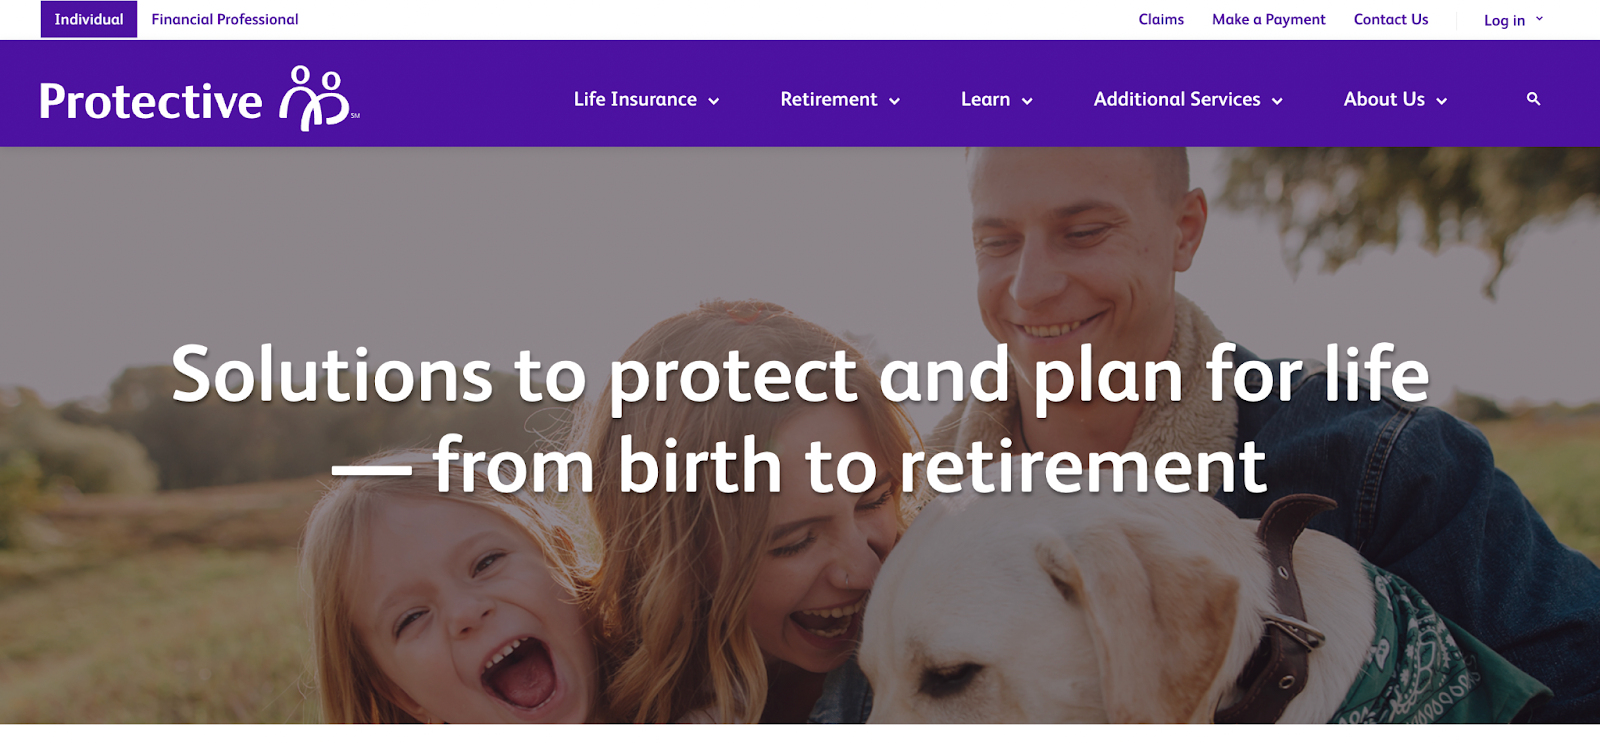 Insurance website design, example from Protective Insurance